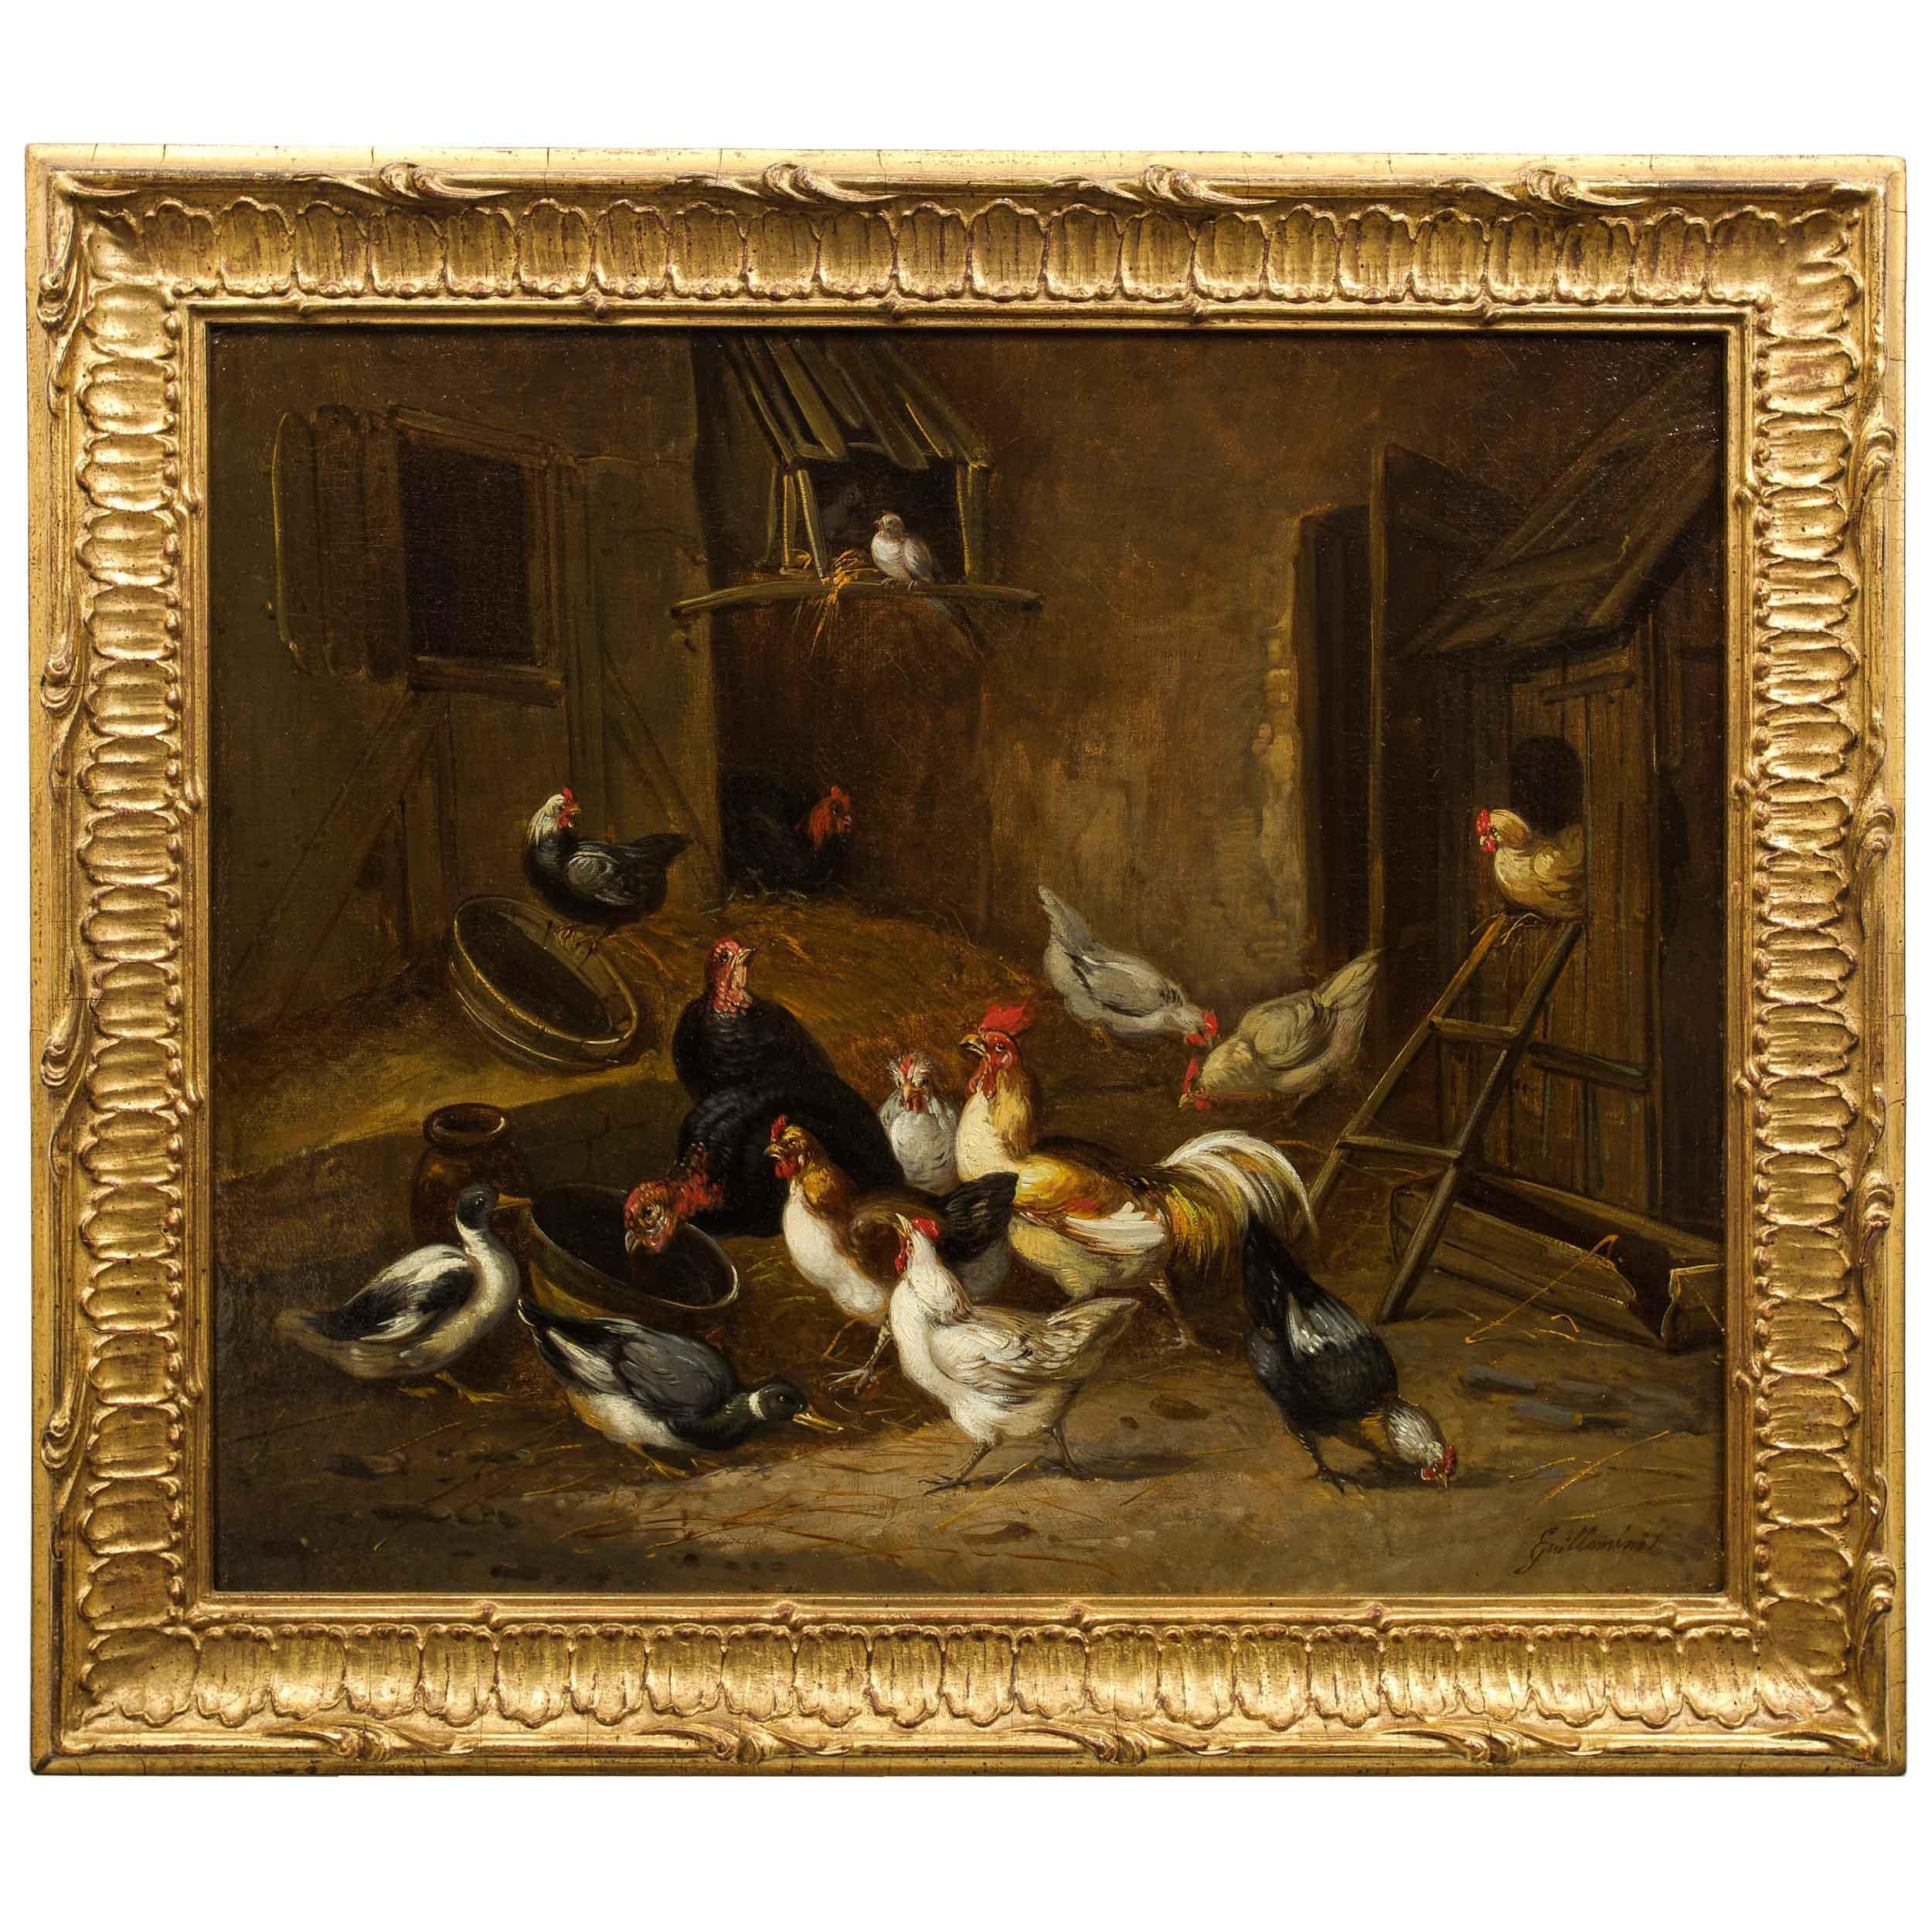 A wonderful rural scene by animal specialist Claude Guilleminet, the scene features a busy barnyard with hens, roosters, ducks and turkeys crowding around water and feed basins and searching throughout the scattered hay for bugs while a pigeon